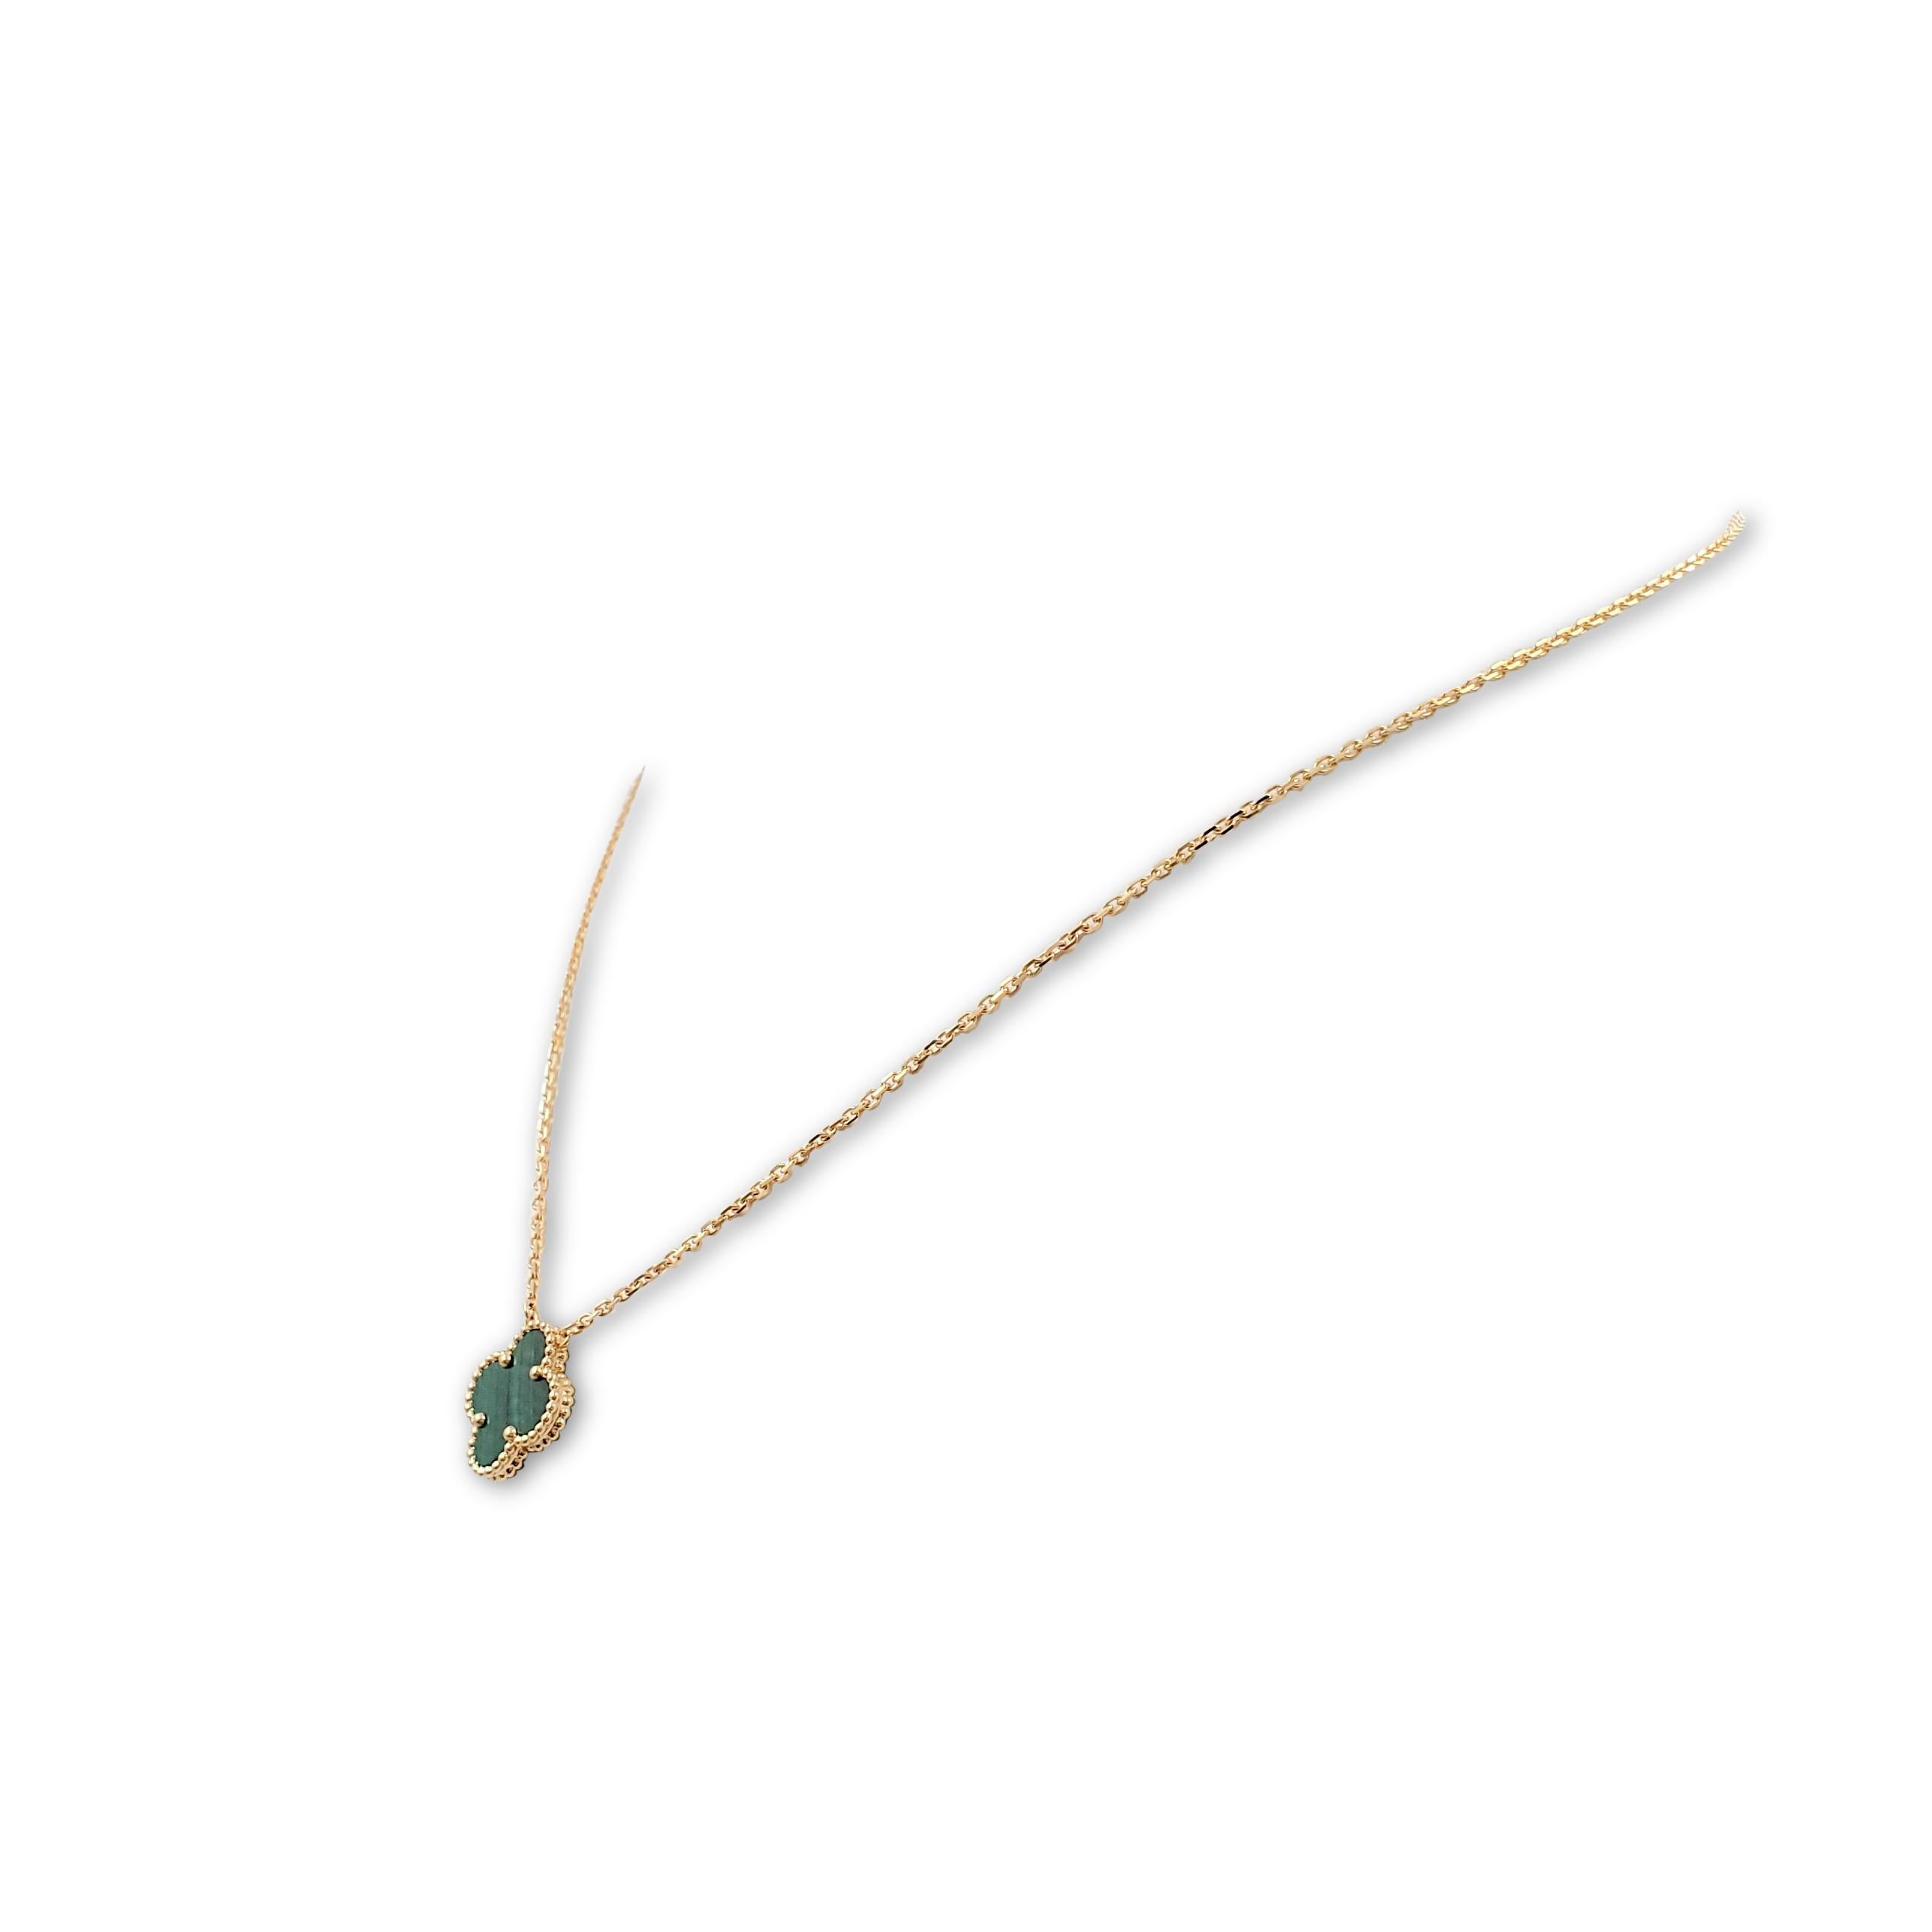 Authentic Van Cleef & Arpels 'Vintage Alhambra' pendant necklace crafted in 18 karat yellow gold features a single malachite clover-inspired motif. Signed VCA, Au750, with serial number. The adjustable chain measures 16 1/2 inches in length. The